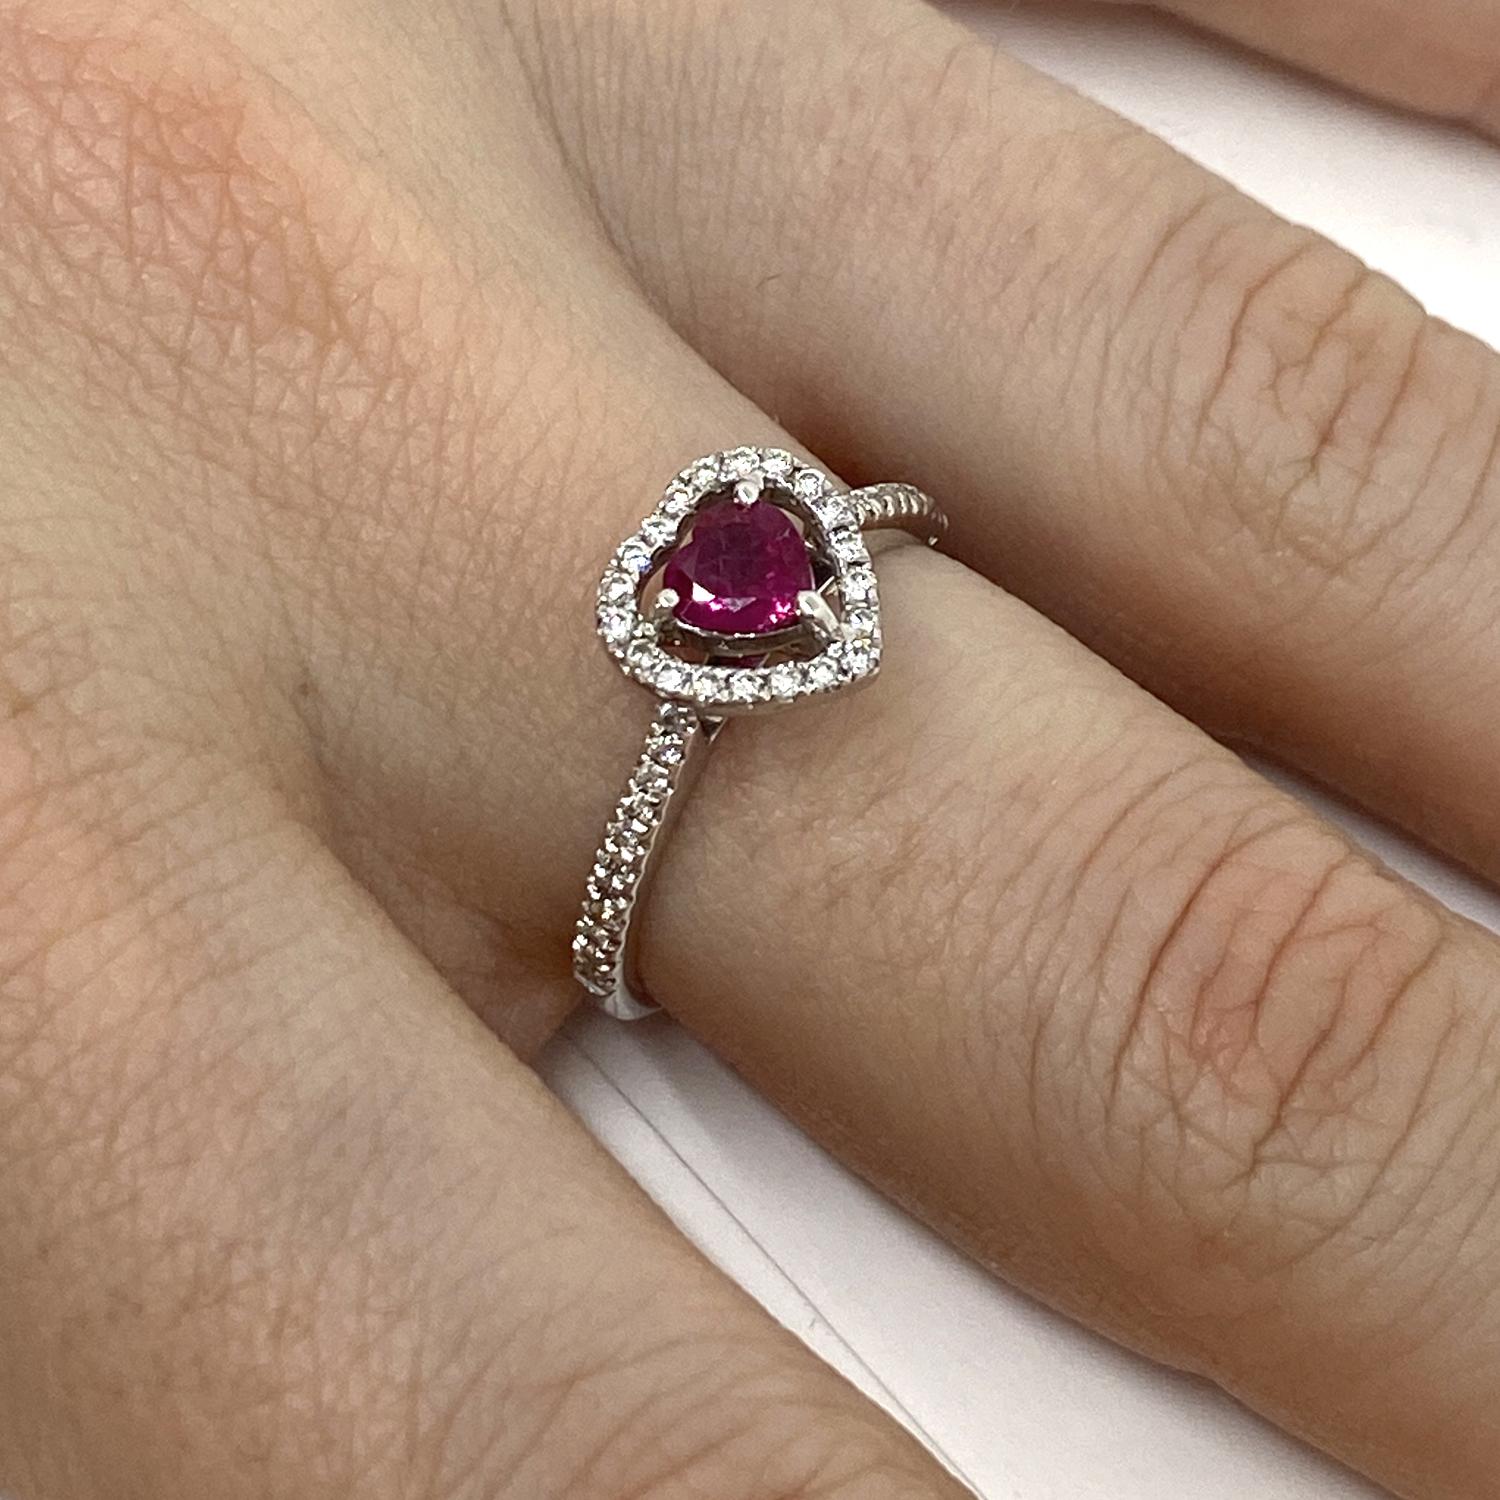 Ring made of 18kt white gold with natural heart-cut ruby for ct.0.52 and natural white brilliant-cut diamond surround for ct.0.24
-------------------------------------------------

Important Note : In order to speed up the publishing process of our